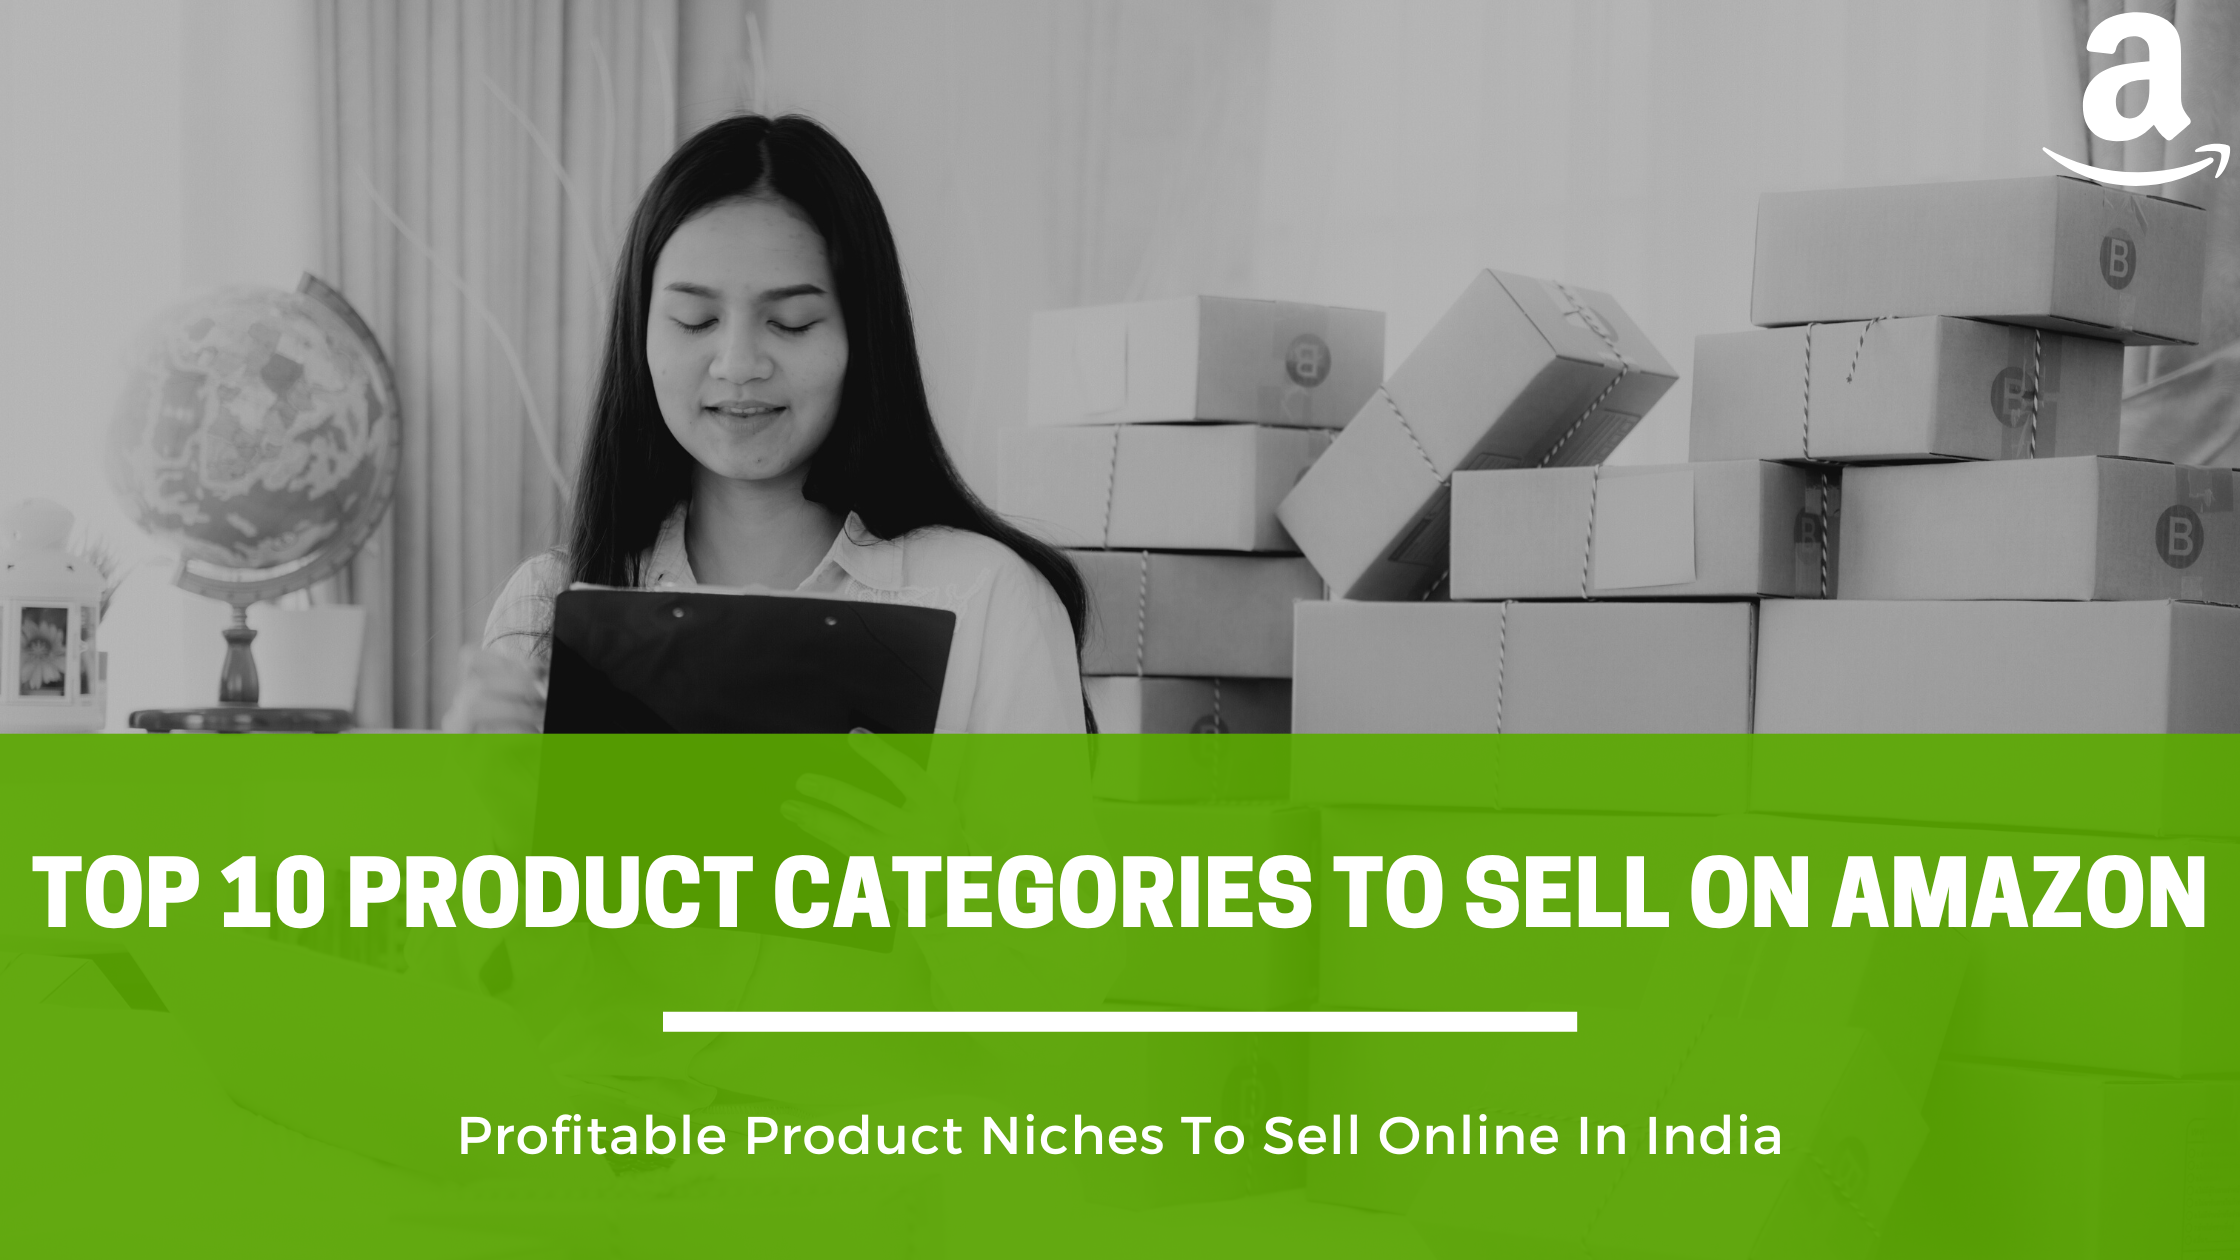 You are currently viewing Top 10 Products Categories to Sell on Amazon India (Profitable Niches)